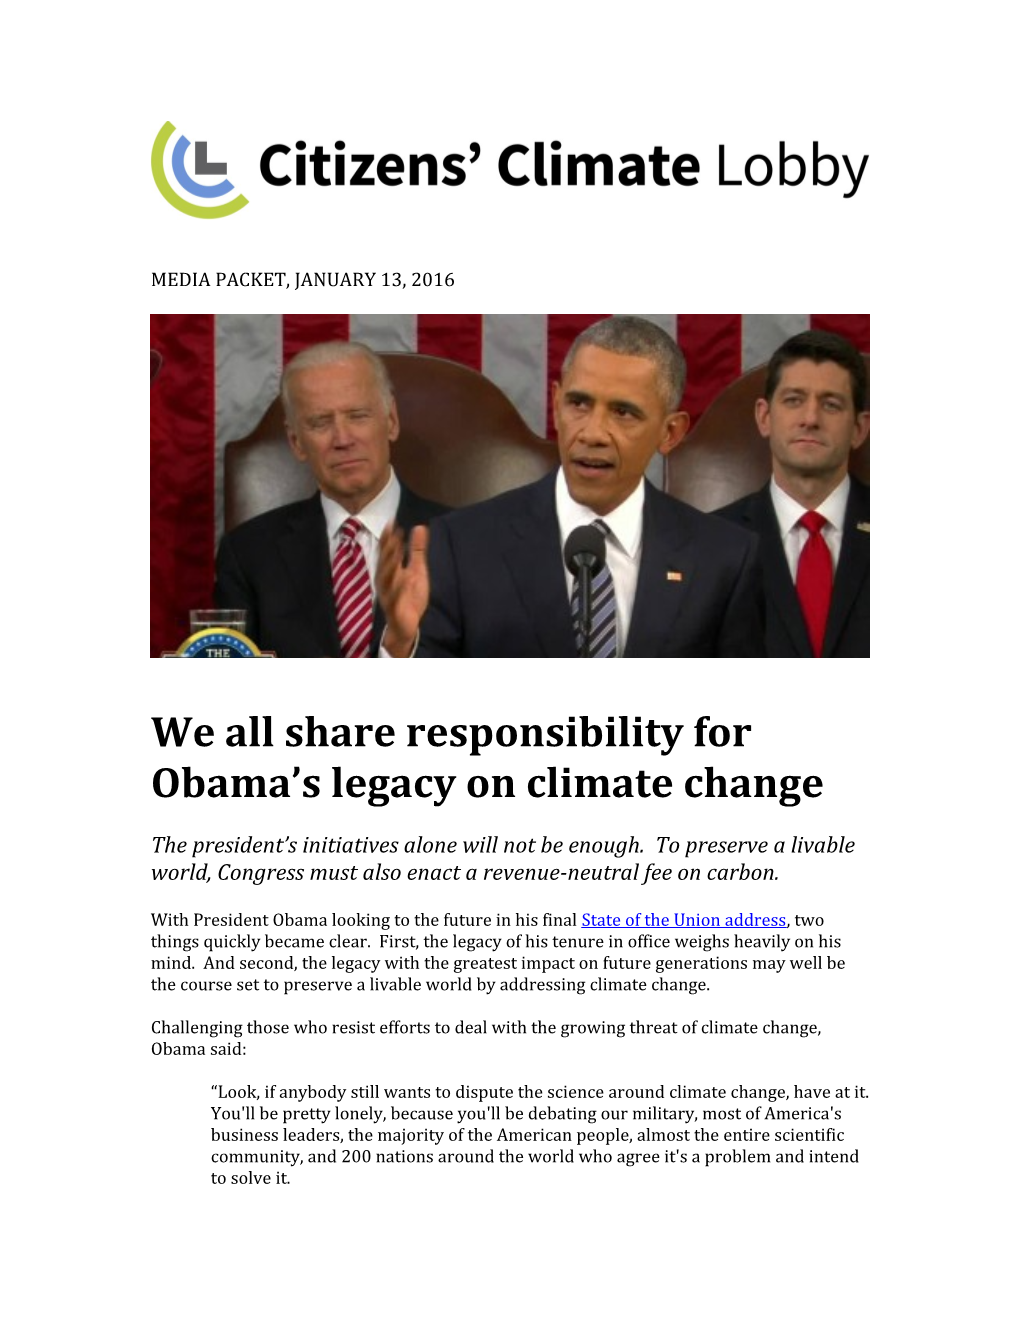 We All Share Responsibility for Obama S Legacy on Climate Change